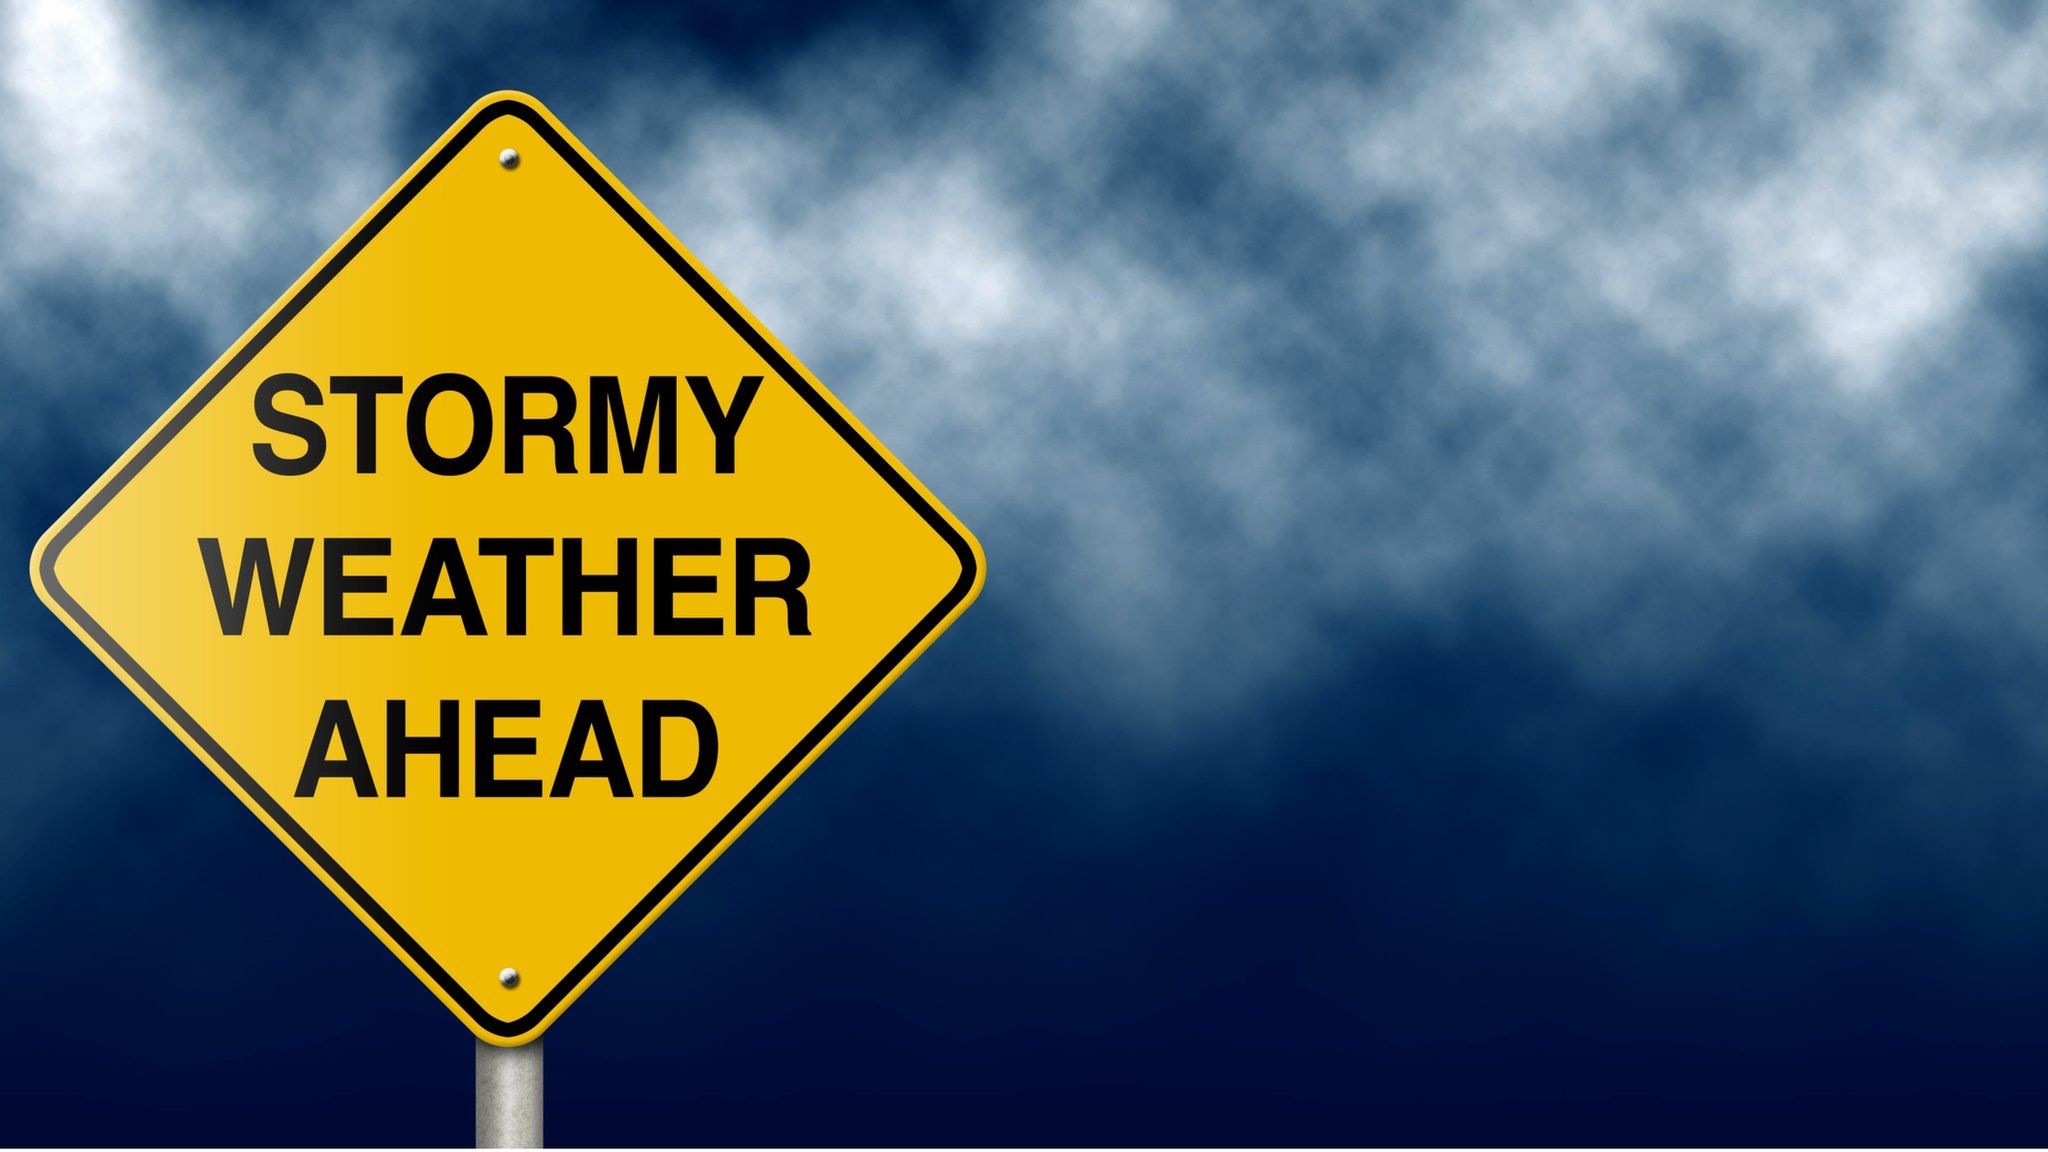 Stormy weather sign